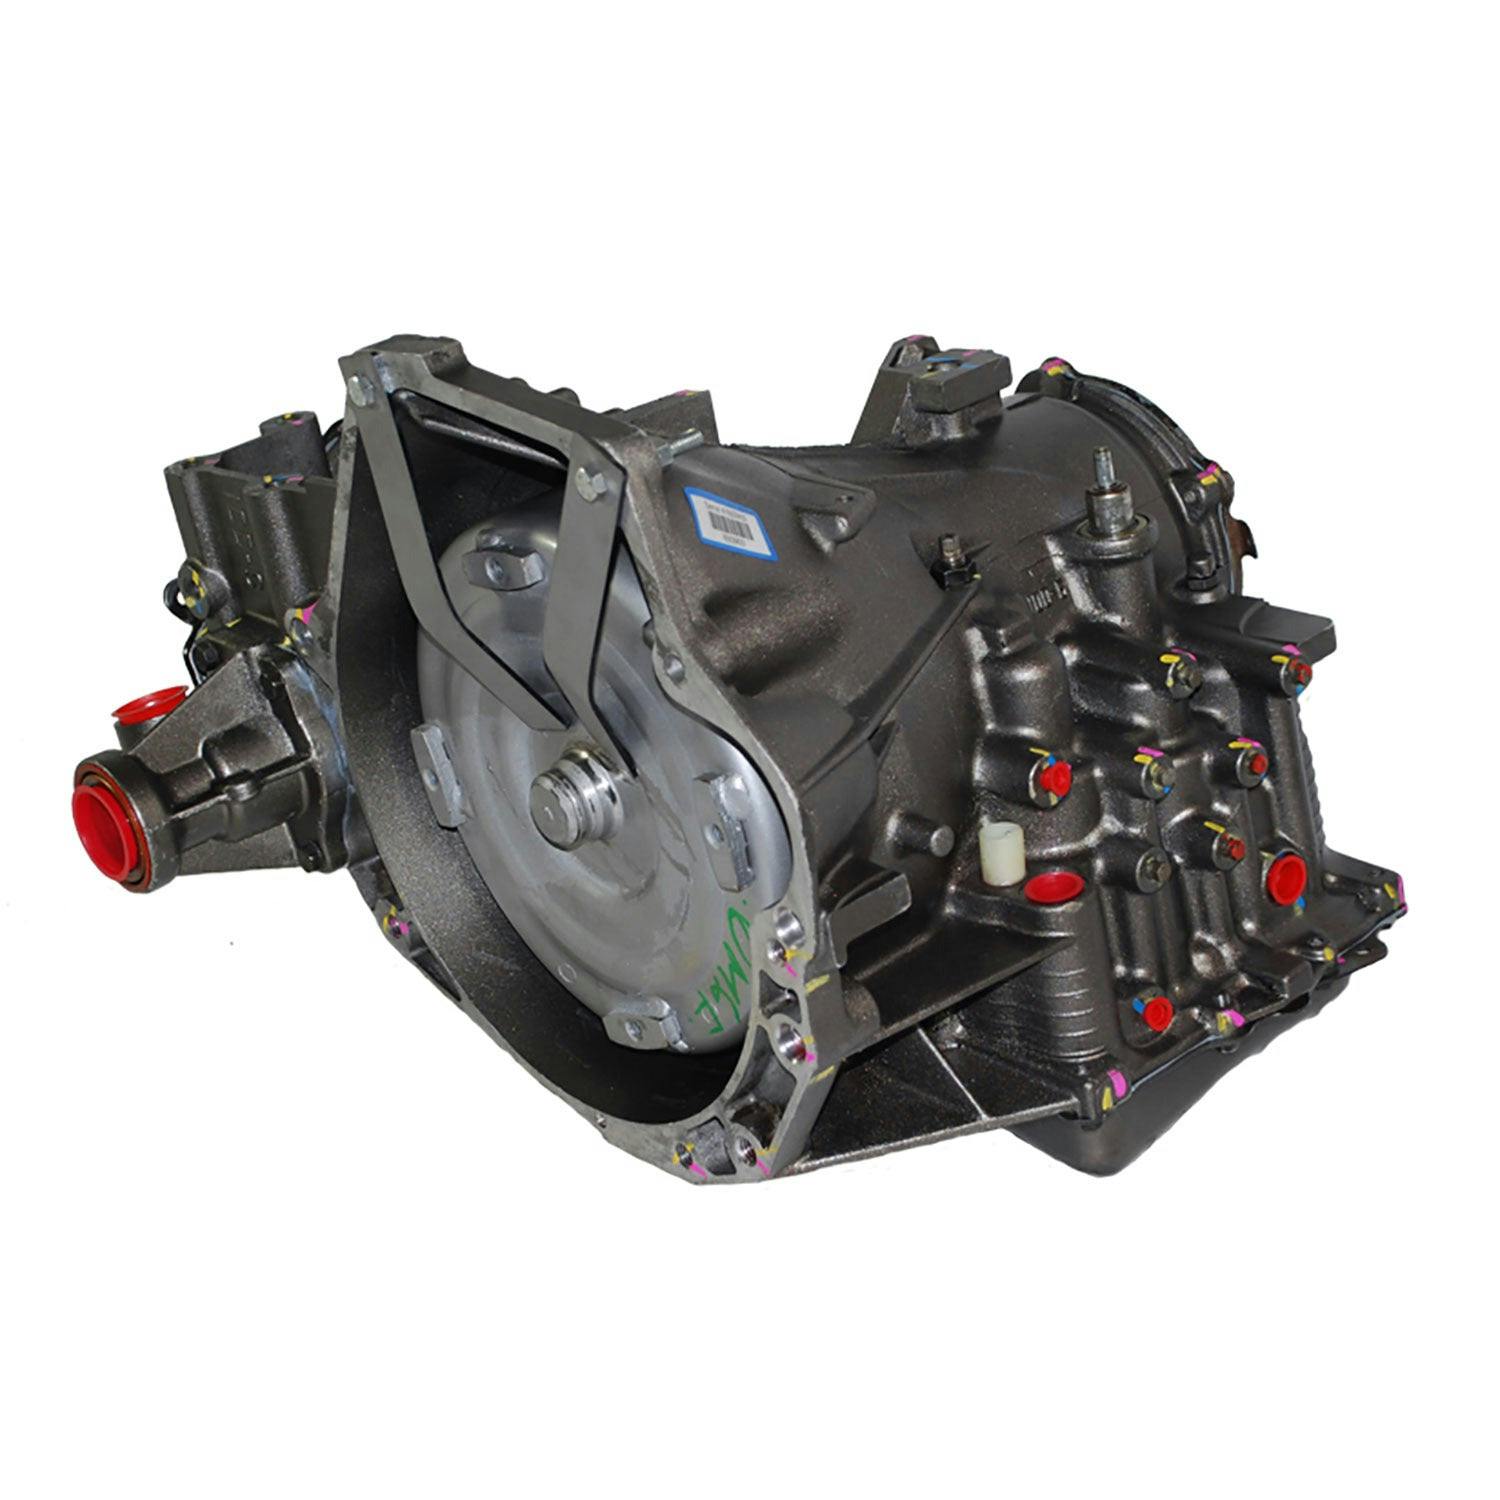 Automatic Transmission for 1996-1998 Dodge Caravan/Grand Caravan and Plymouth Grand Voyager/Voyager FWD with 3L V6 Engine